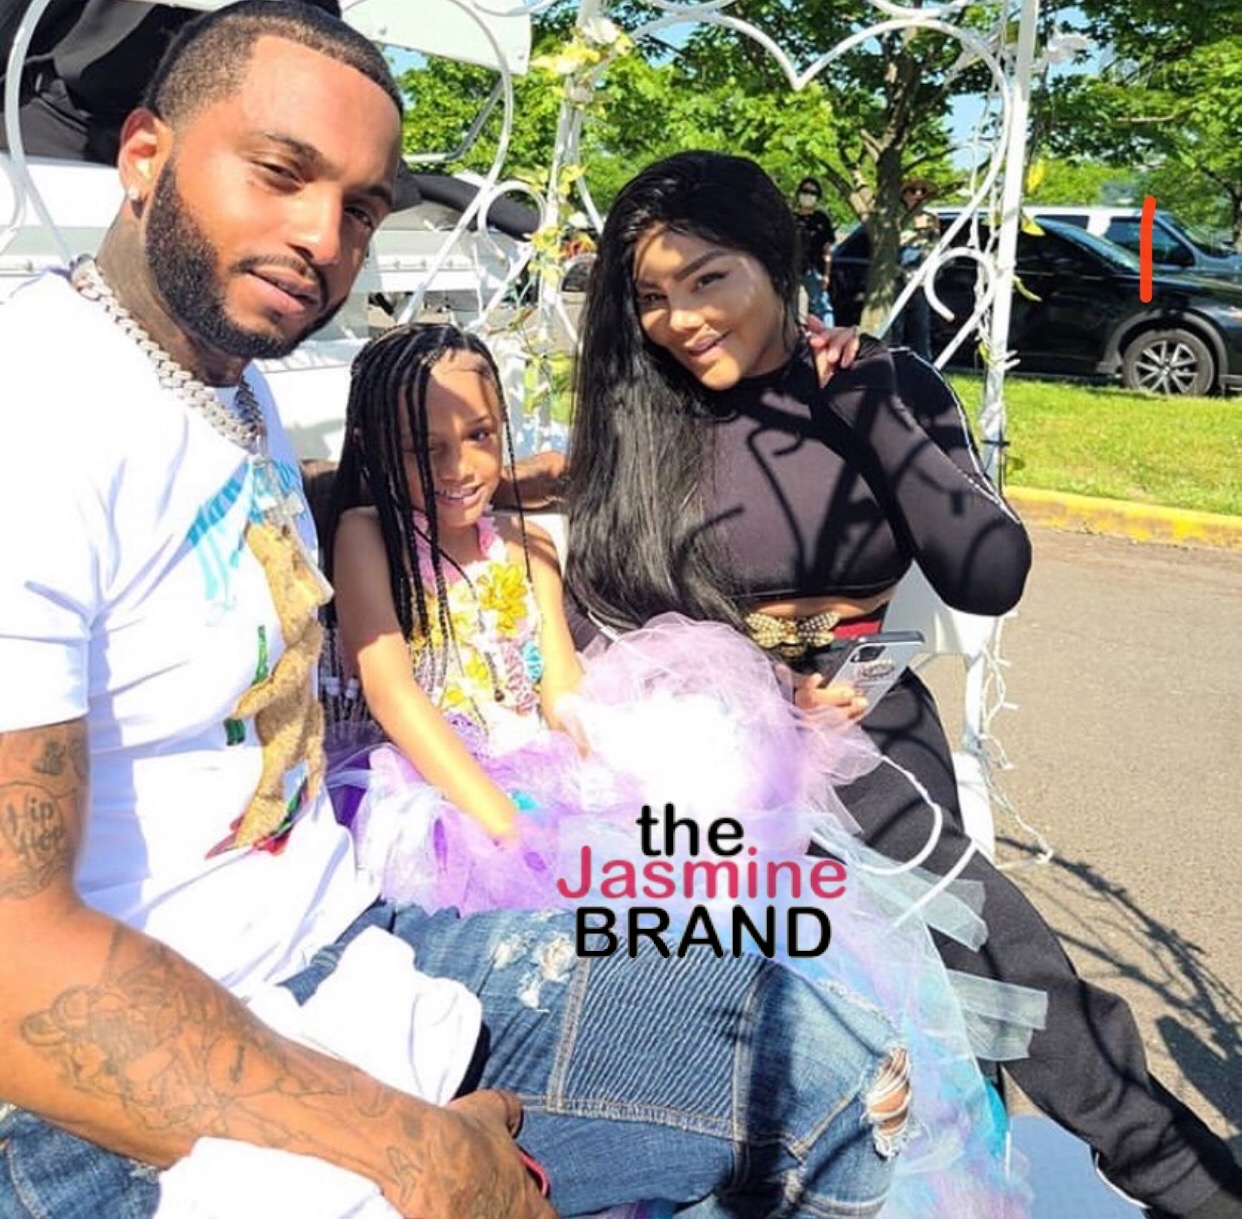 Lil Kim S Ex Mr Papers Suggests They Re Working On Baby 2 We 2 Steps Ahead Of You Thejasminebrand Lil kim's baby daddy cries on instagram after rapper reveals new boyfriend to the world! lil kim s ex mr papers suggests they